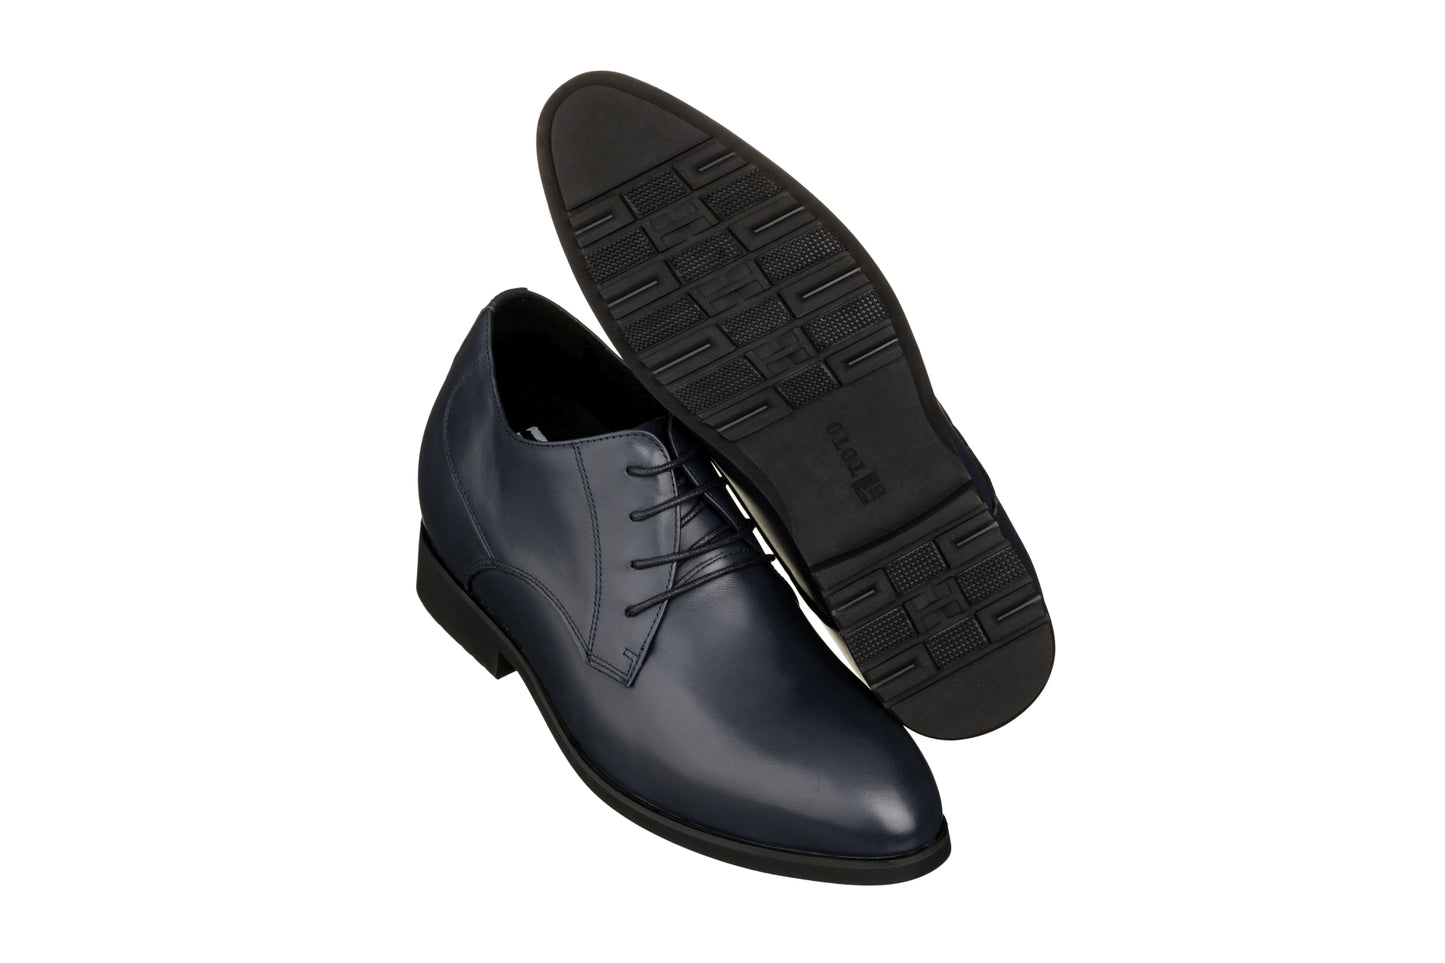 Elevator shoes height increase TOTO - K8008 - 3.6 Inches Taller (Slate Blue) - Dress Oxford